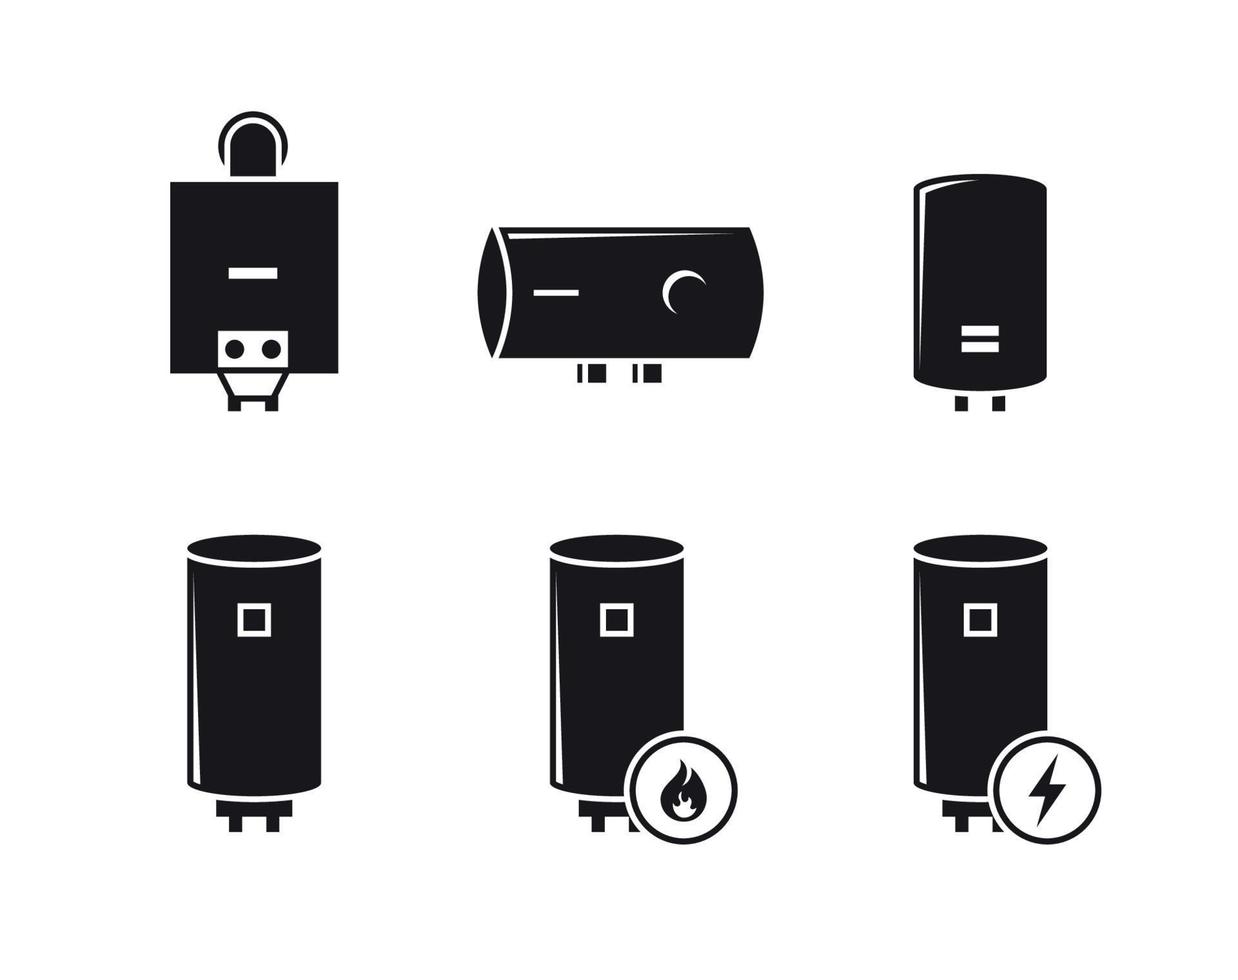 Boiler icons set, black on a white background vector